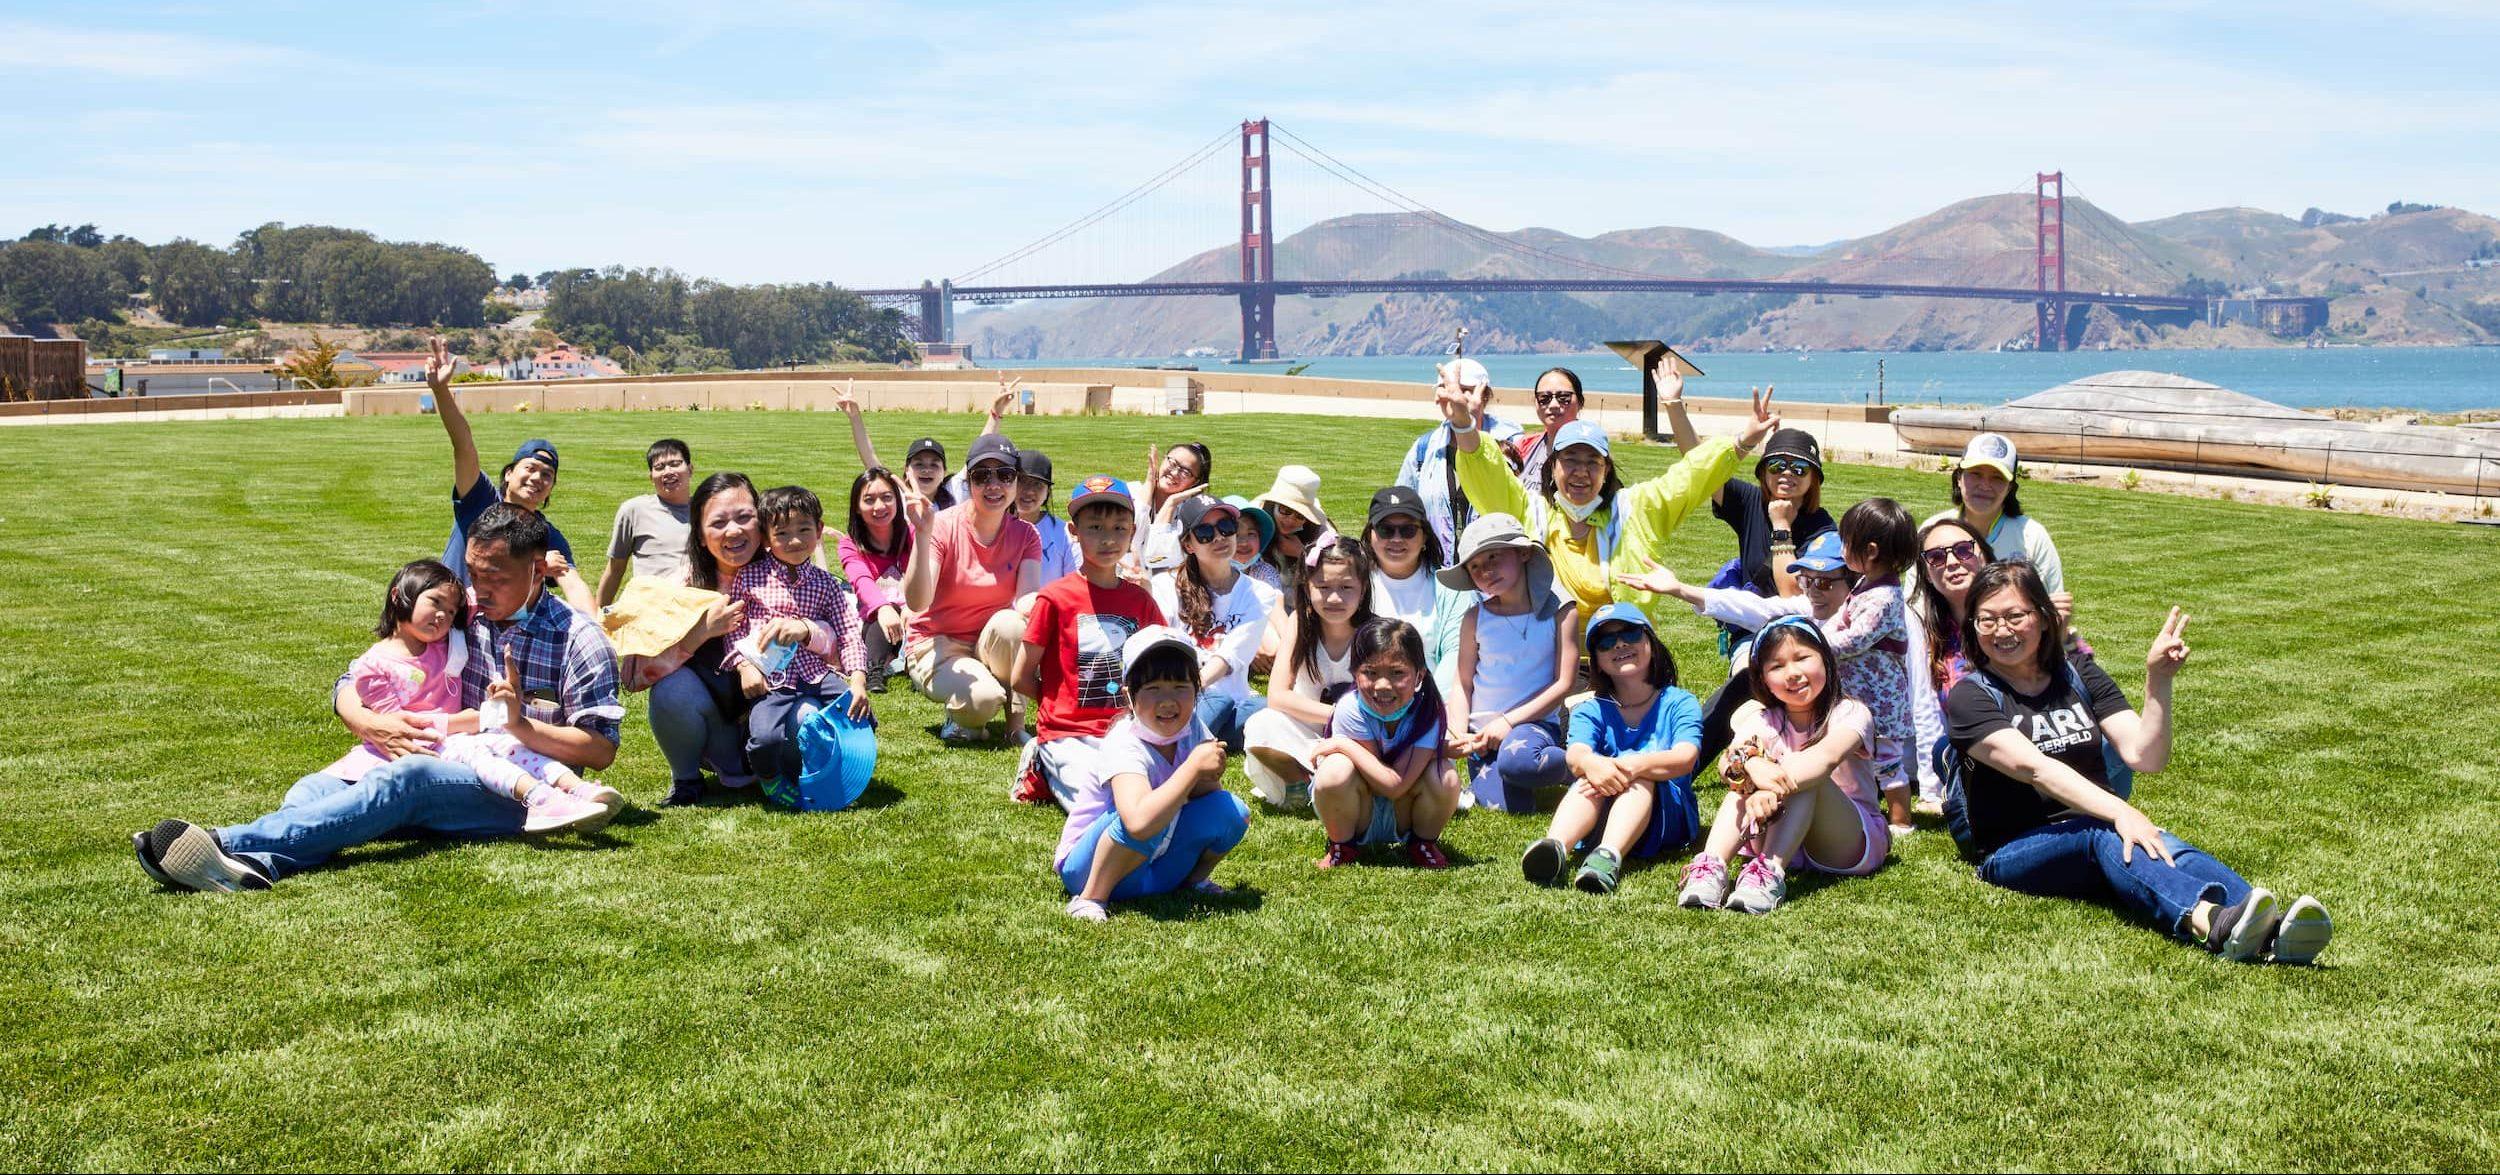 A large group of kids on a lawn at Presidio Tunnel Tops. Photo by Rachel Styer.